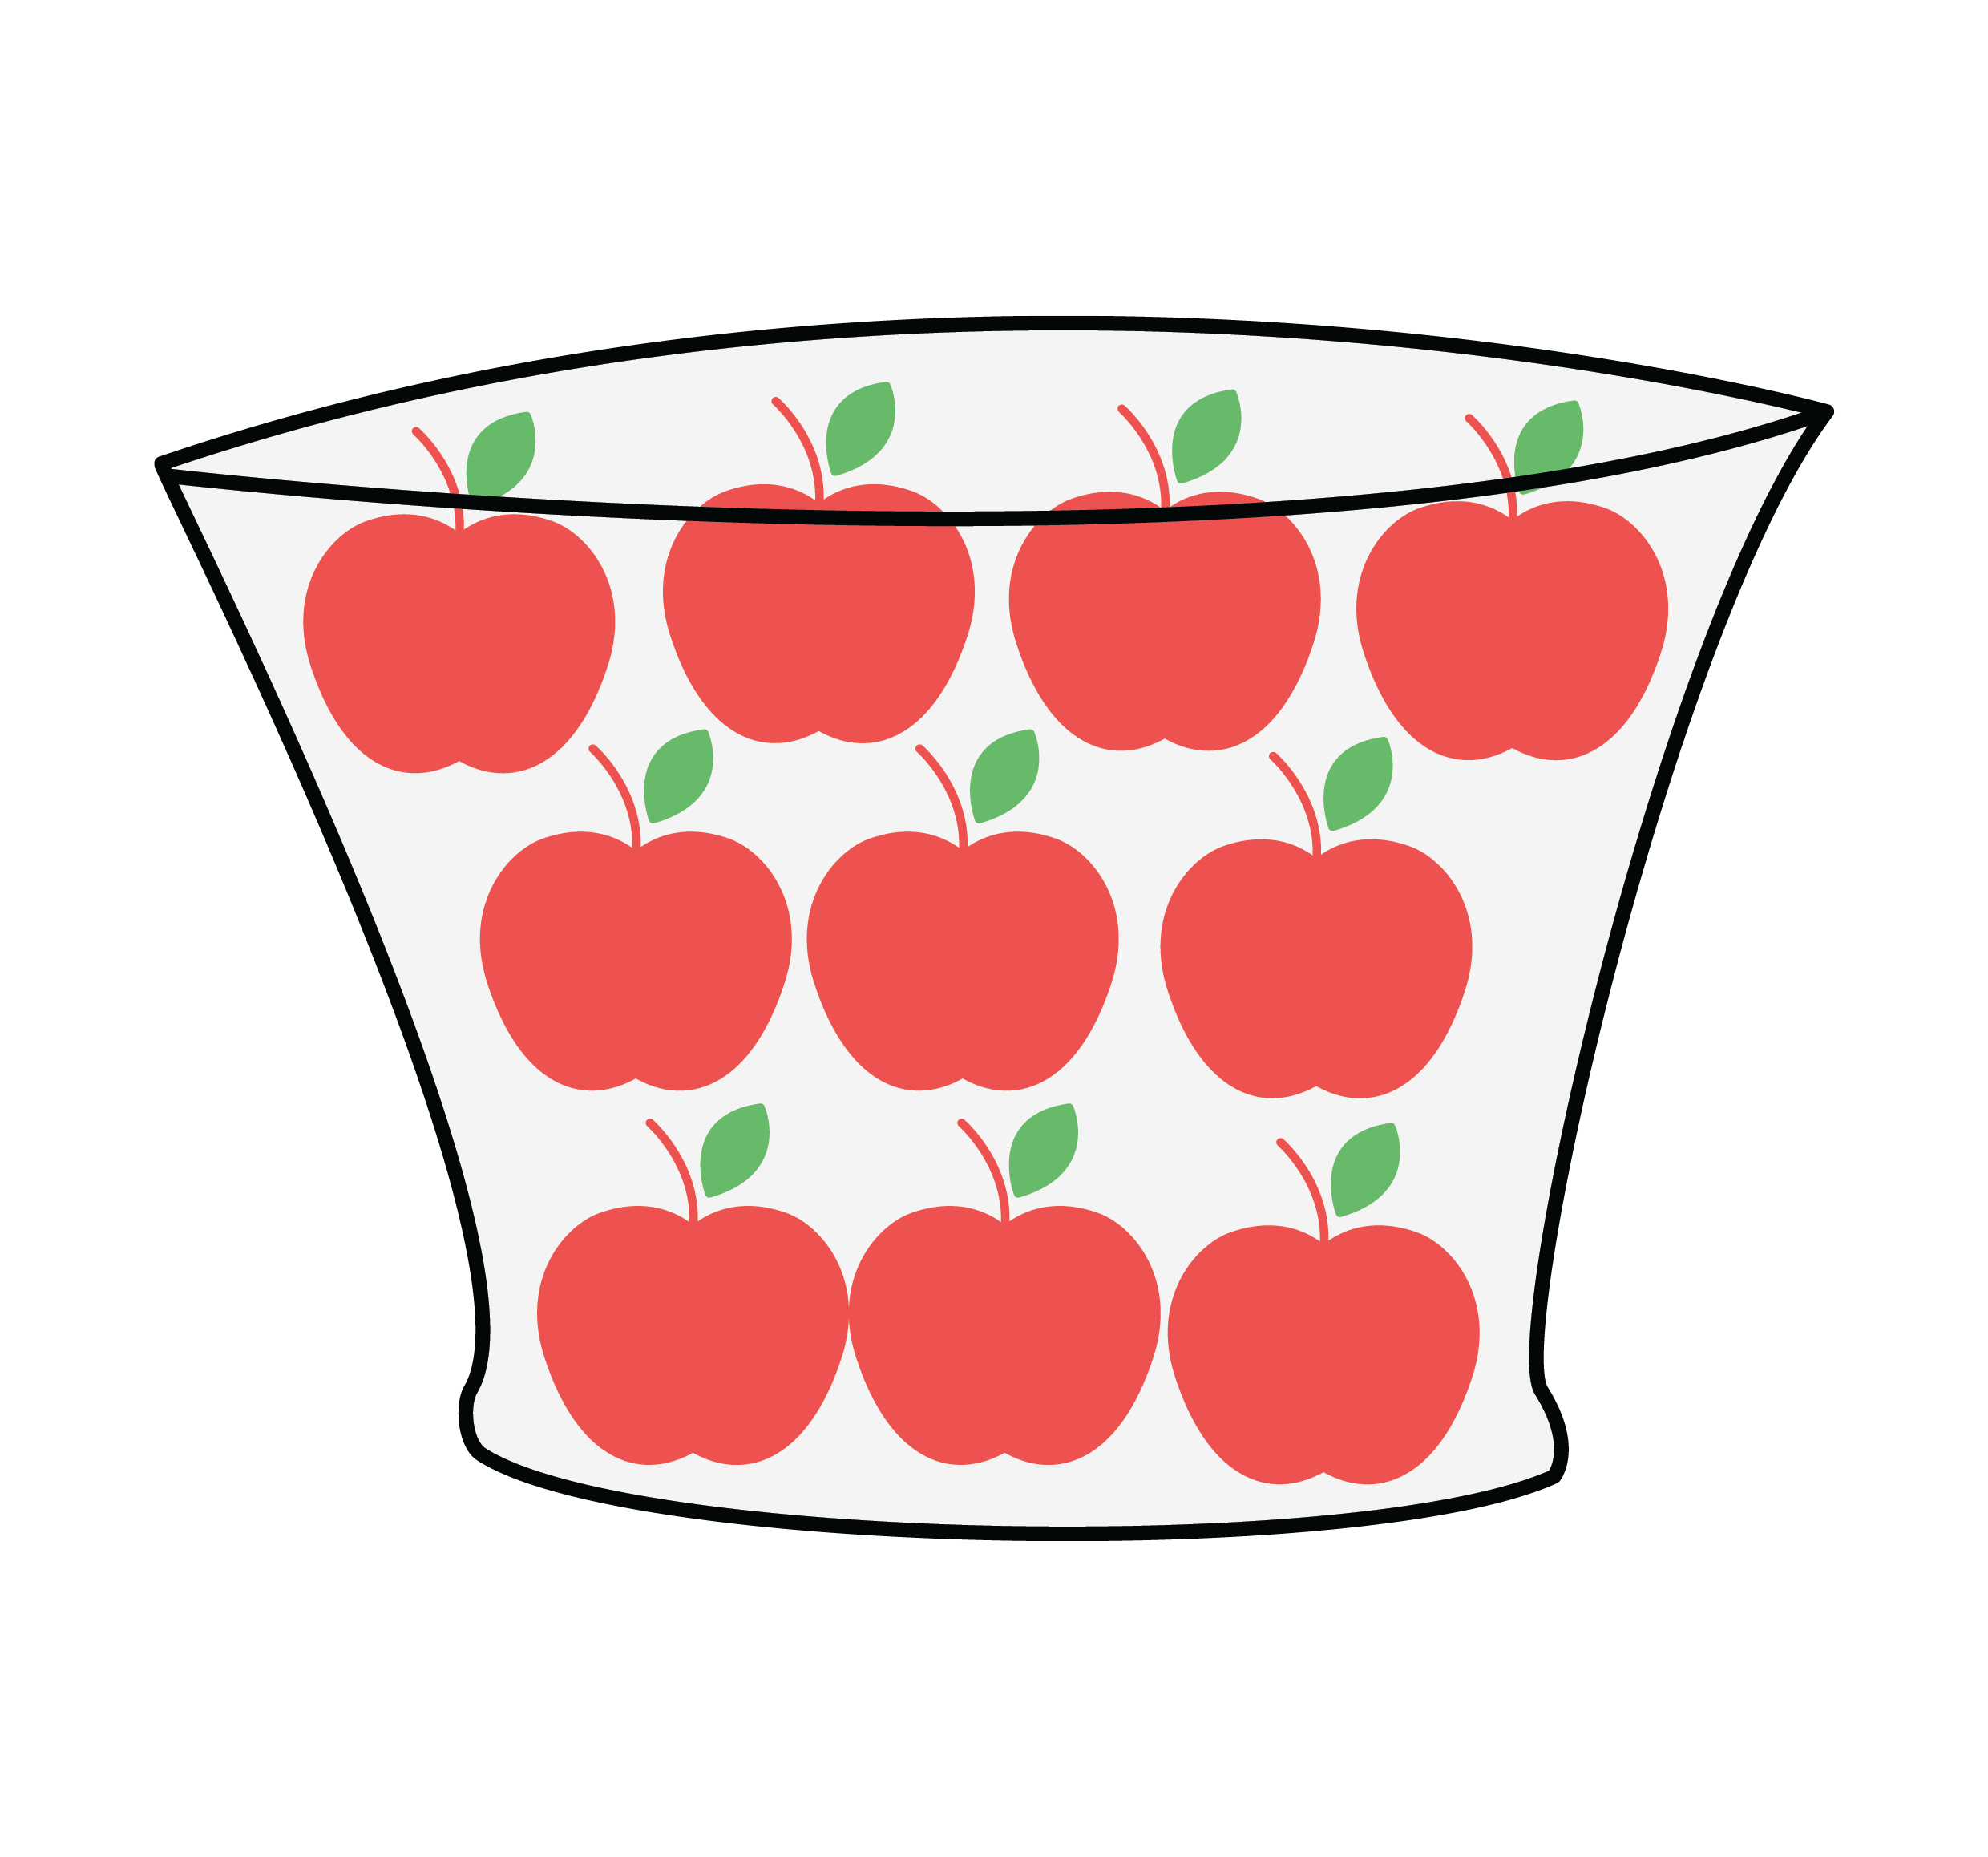 Clipart apples puzzle. Solution to math learning